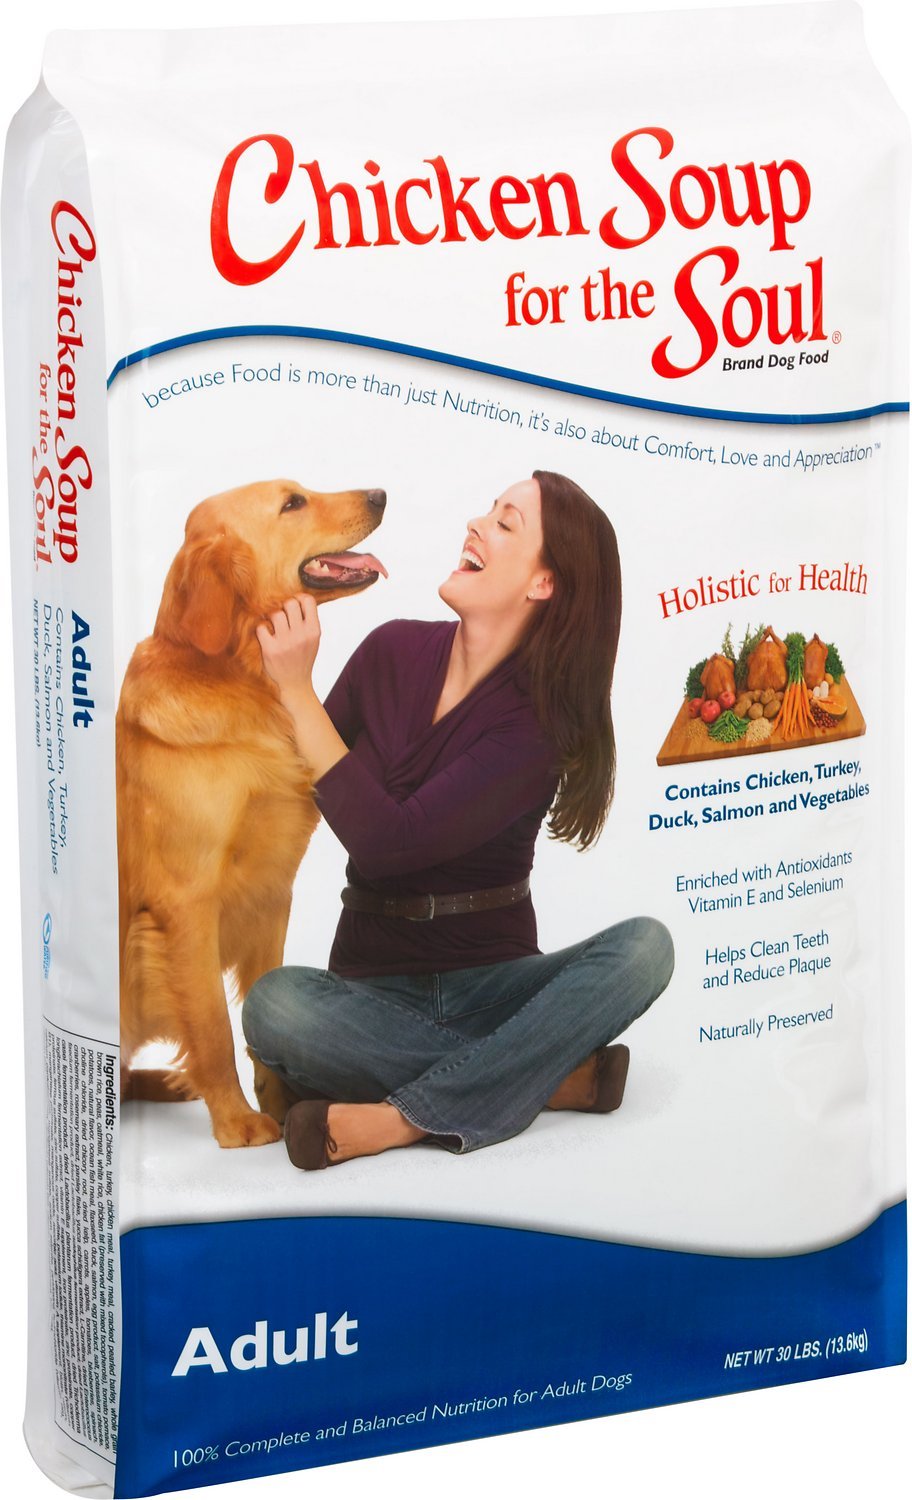 Chicken Soup for the Soul Adult Dry Dog Food, 30